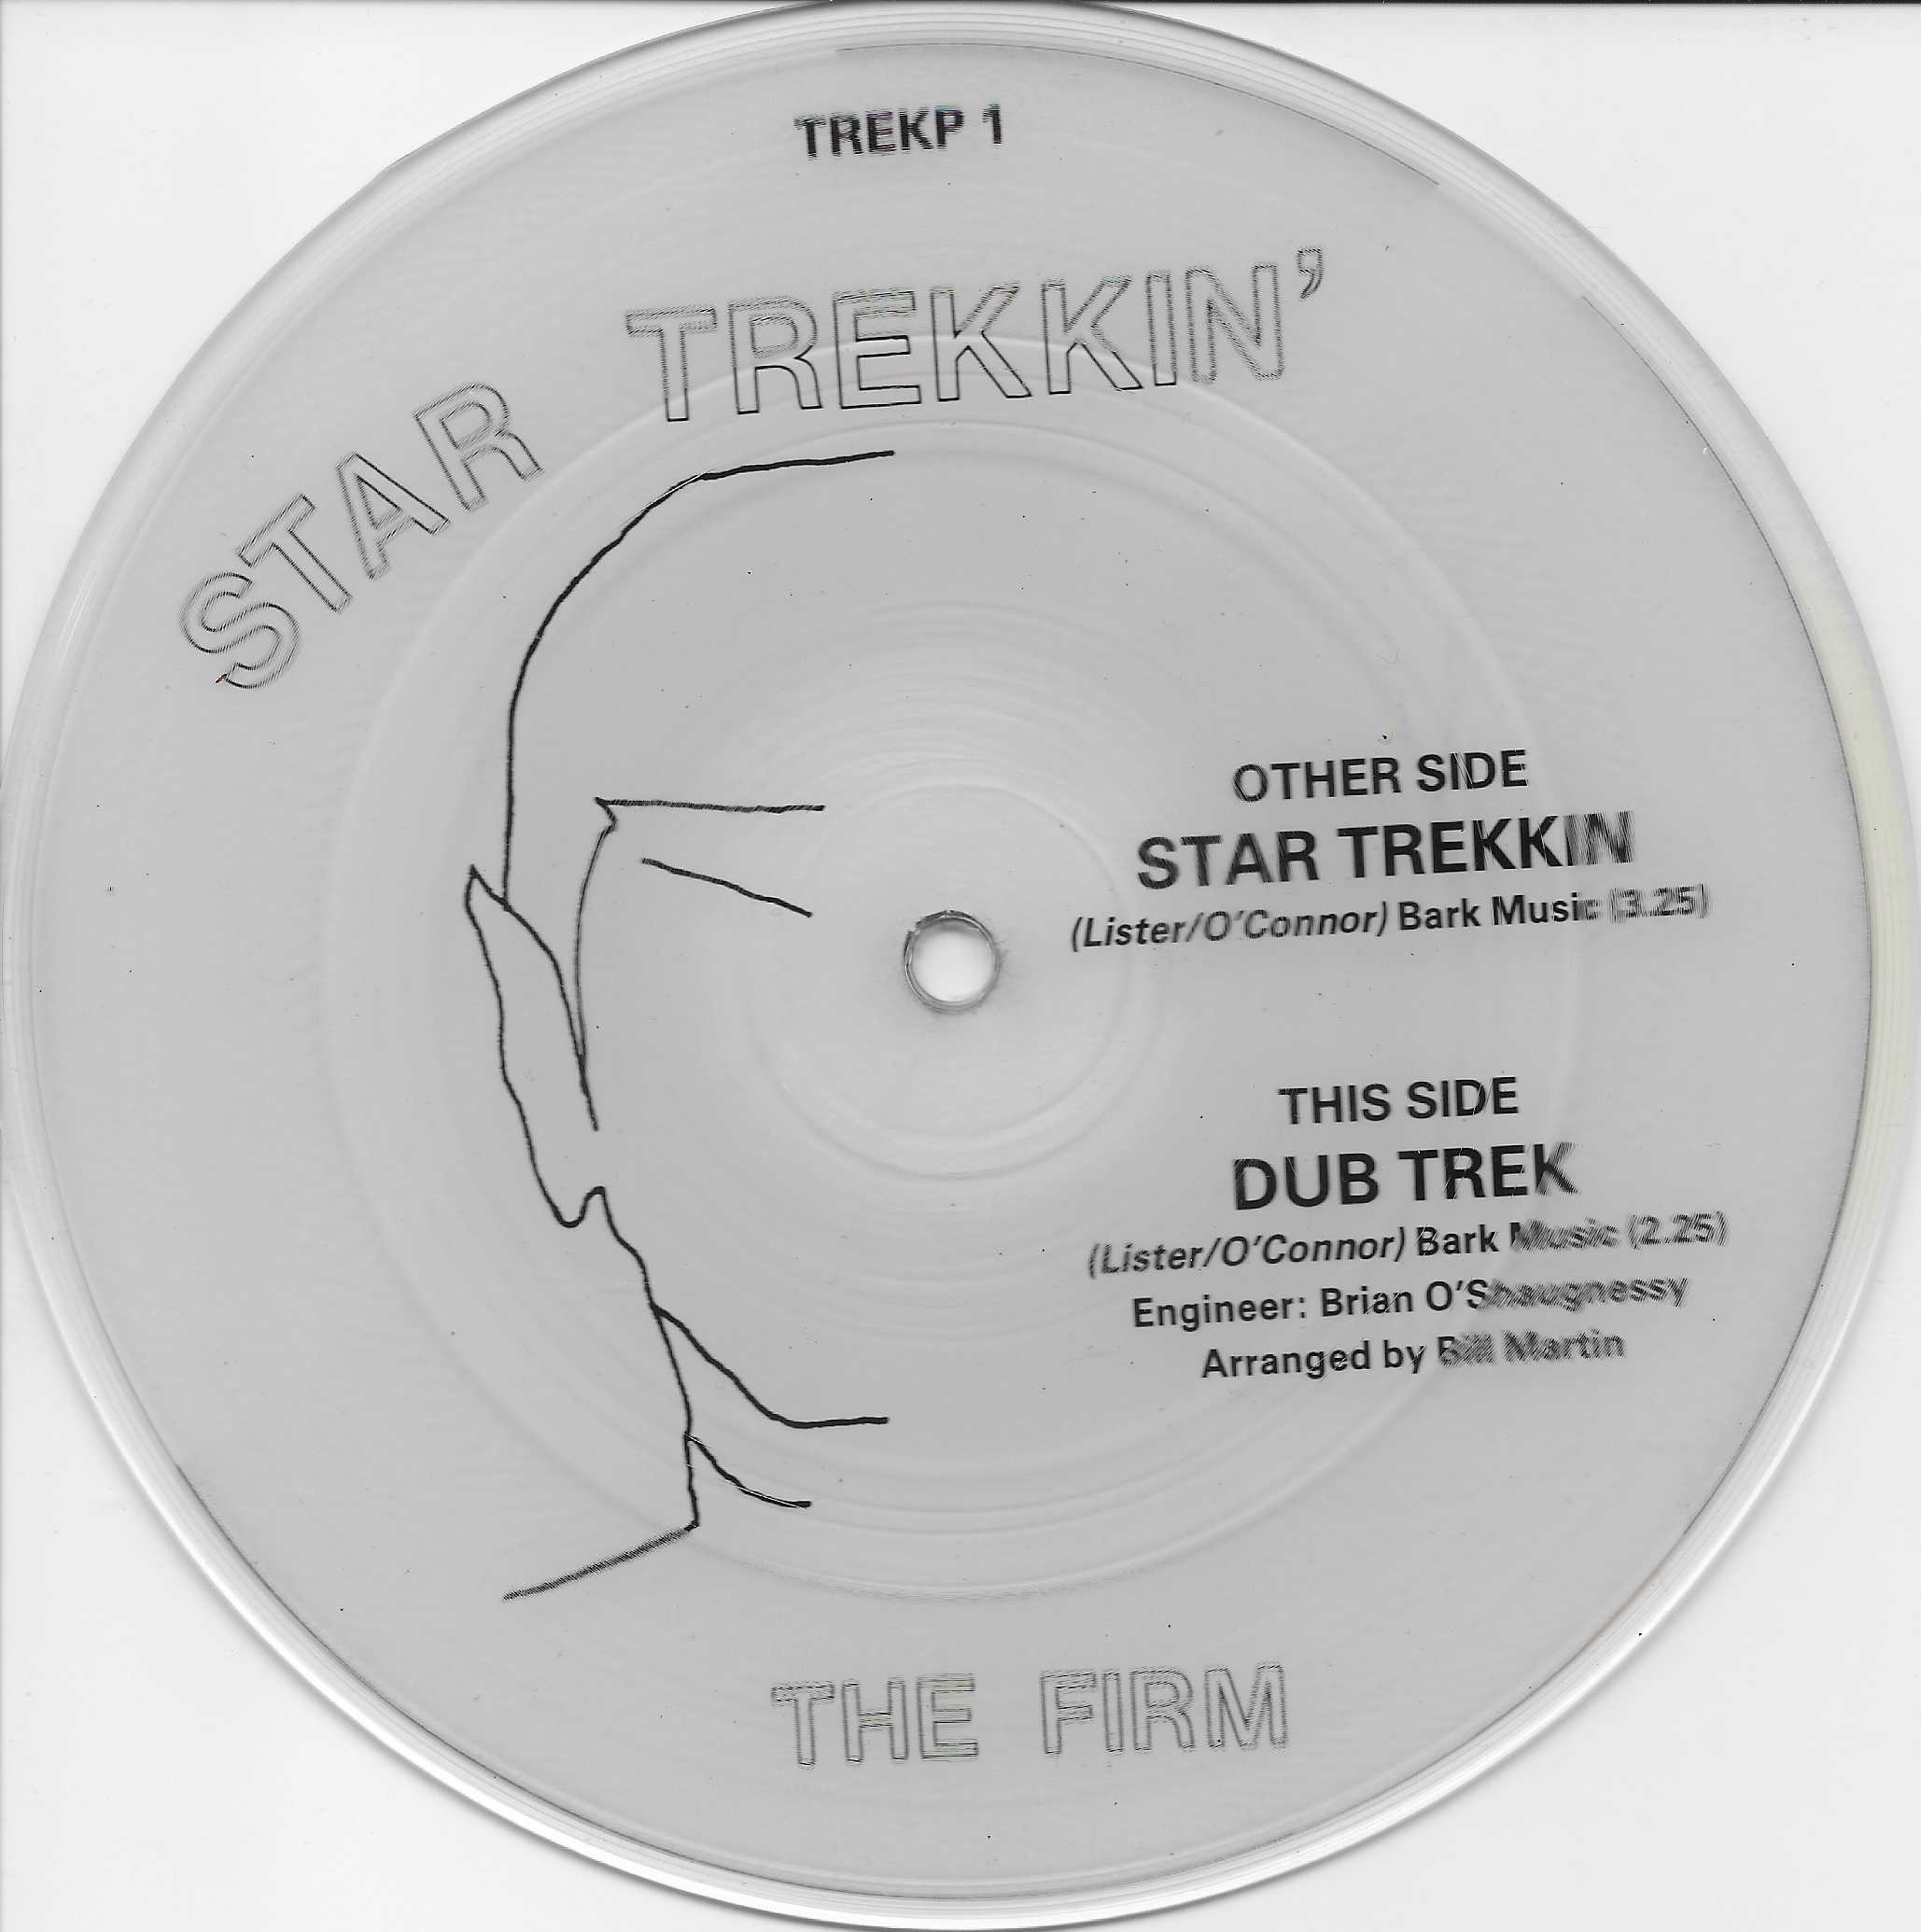 Picture of TREK P 1 Star trekkin' by artist Lister / O'Connor / The Firm from the BBC records and Tapes library